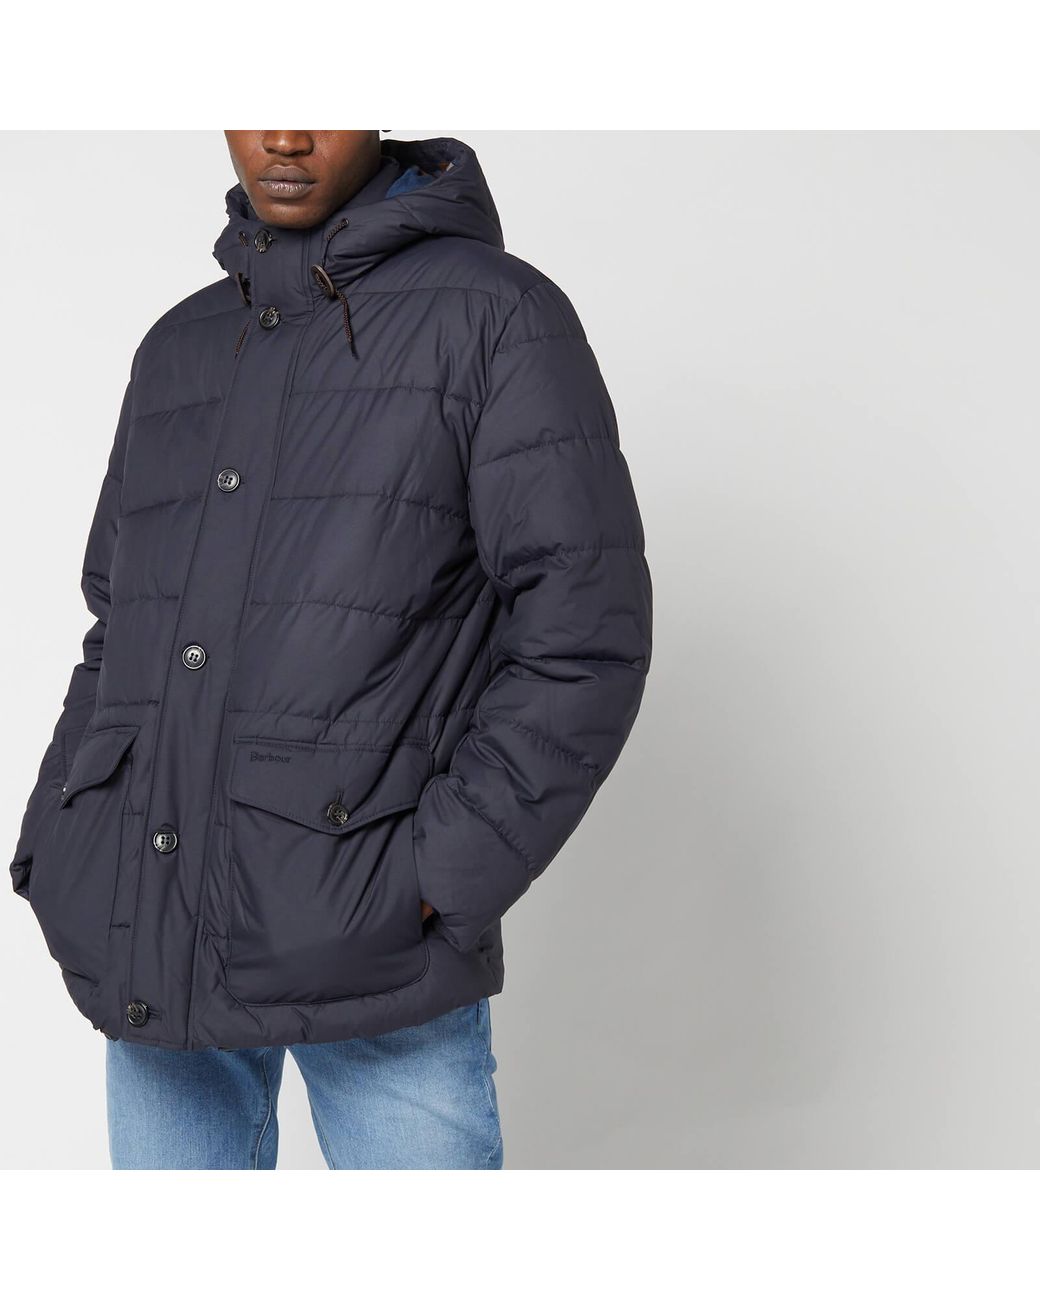 Barbour Synthetic Mobury Quilt Jacket in Blue for Men - Lyst